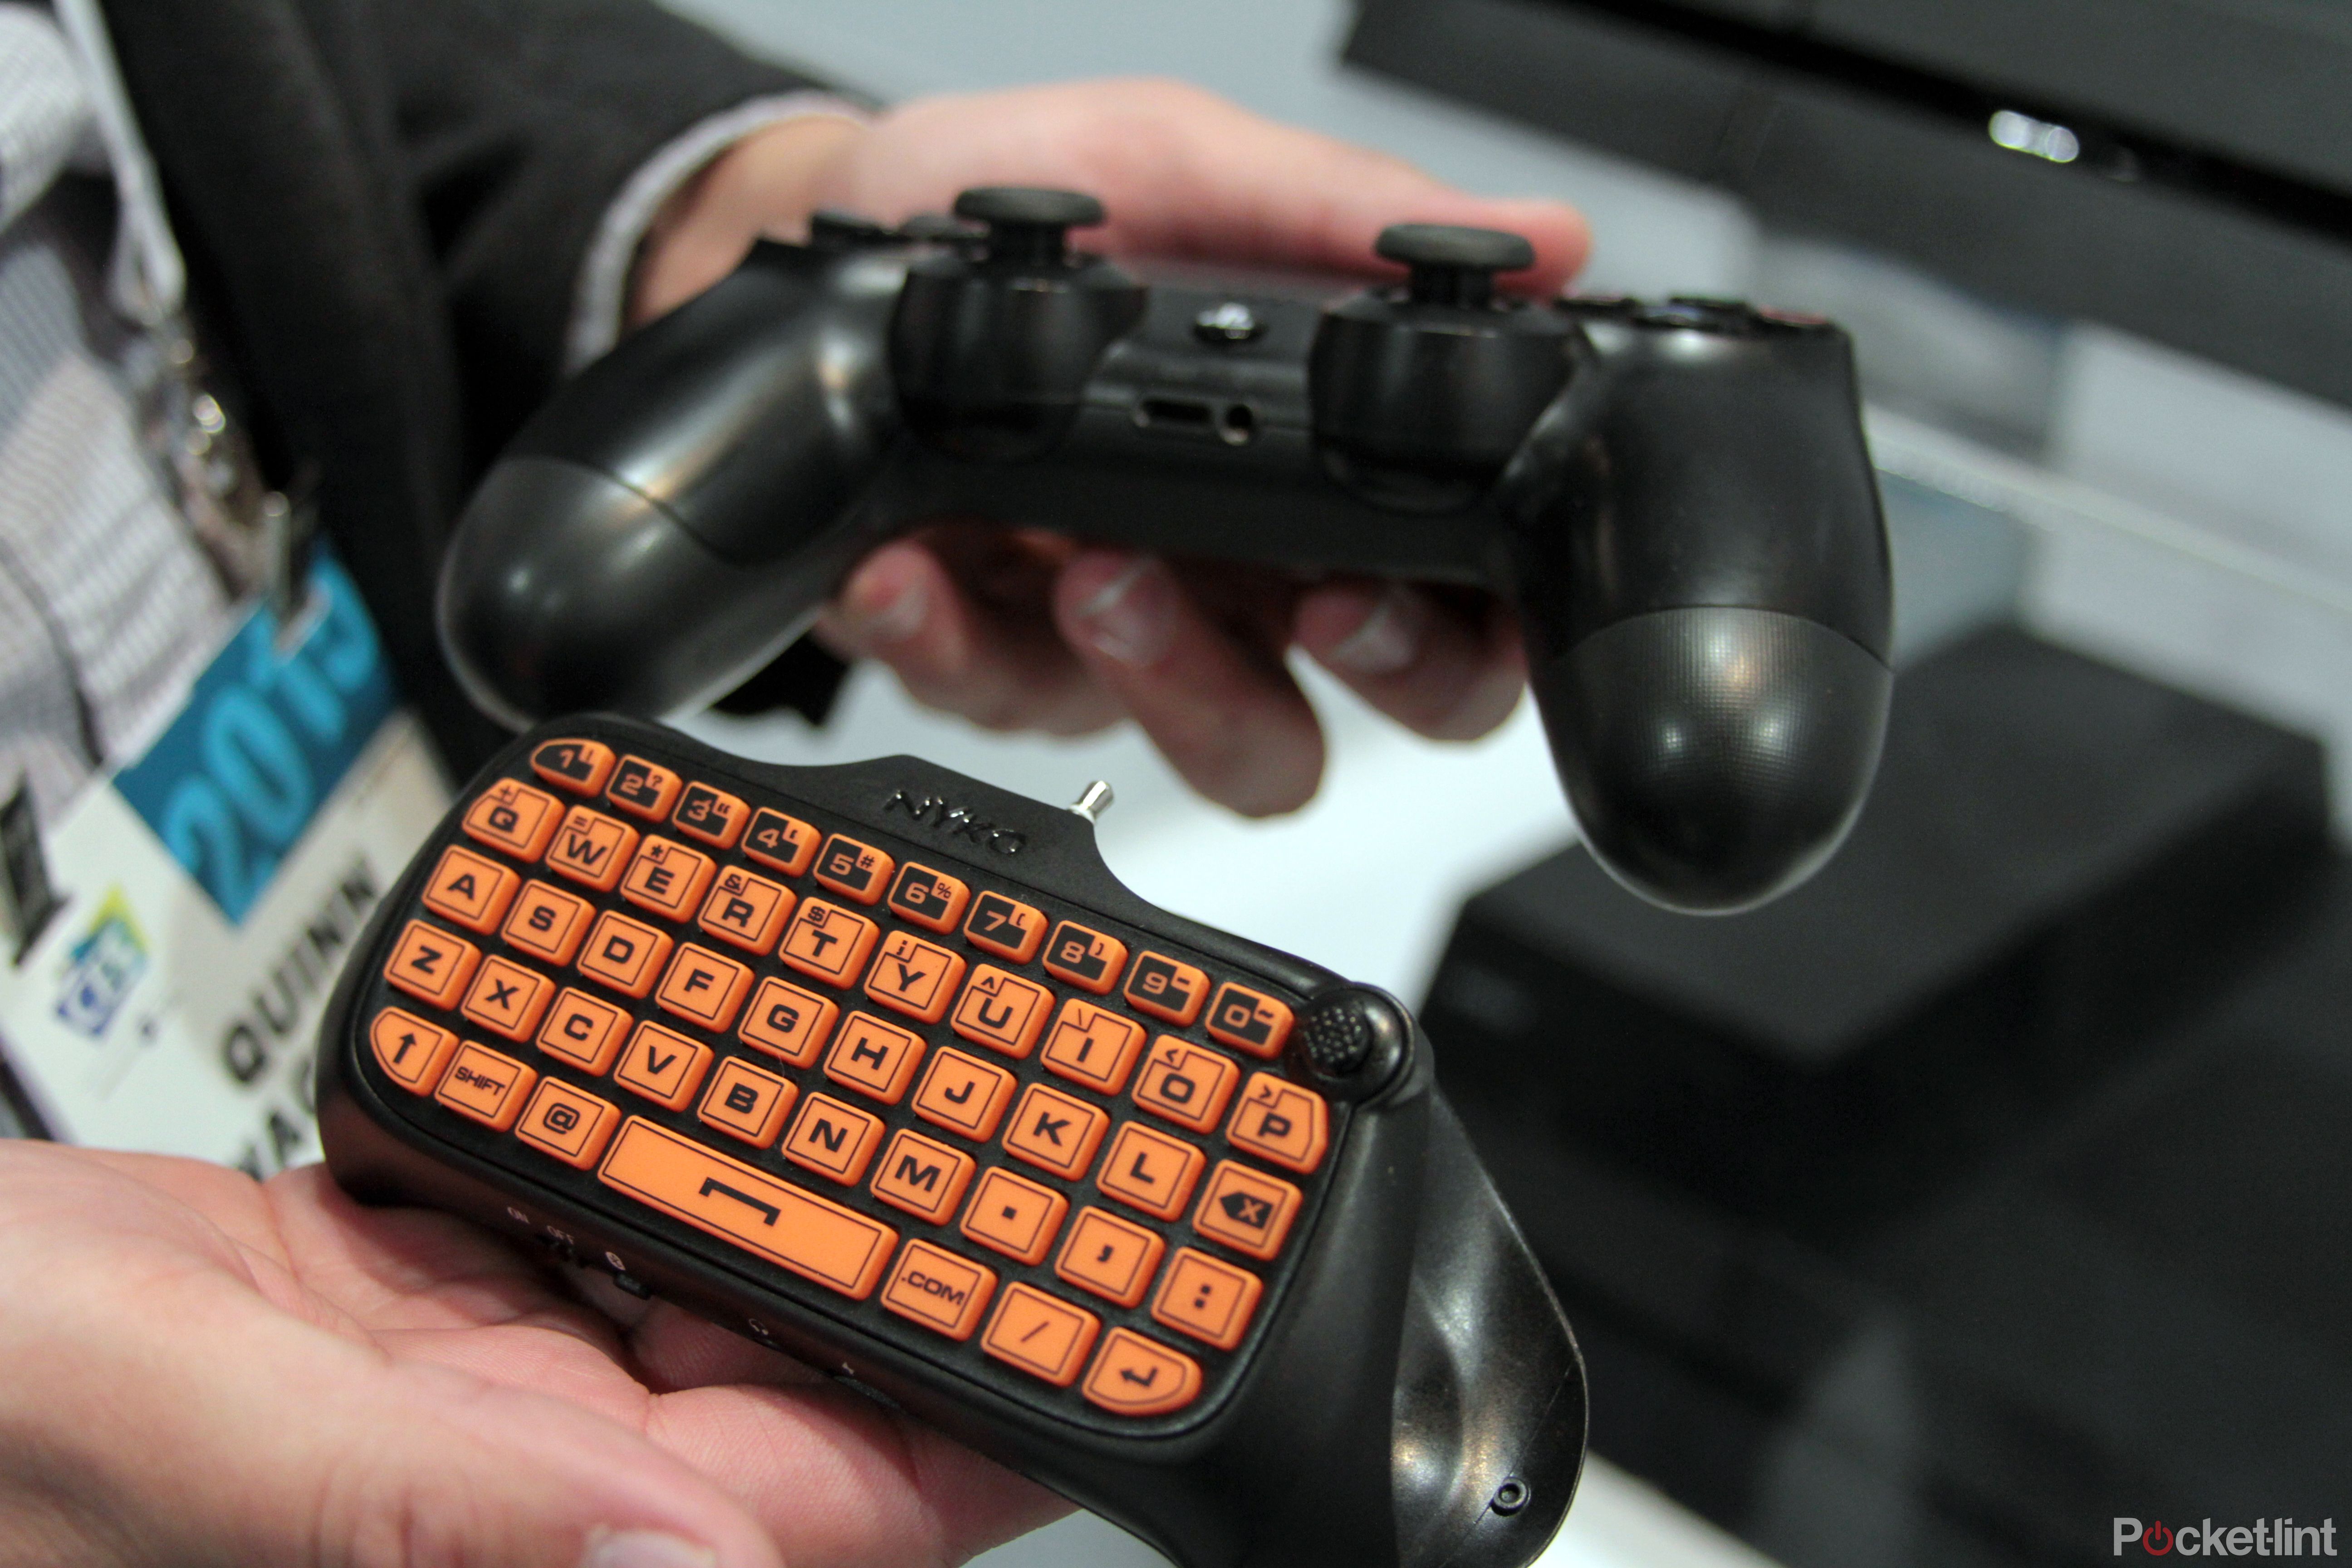 nyko data bank and type pad could dramatically improve your ps4 eyes on image 10